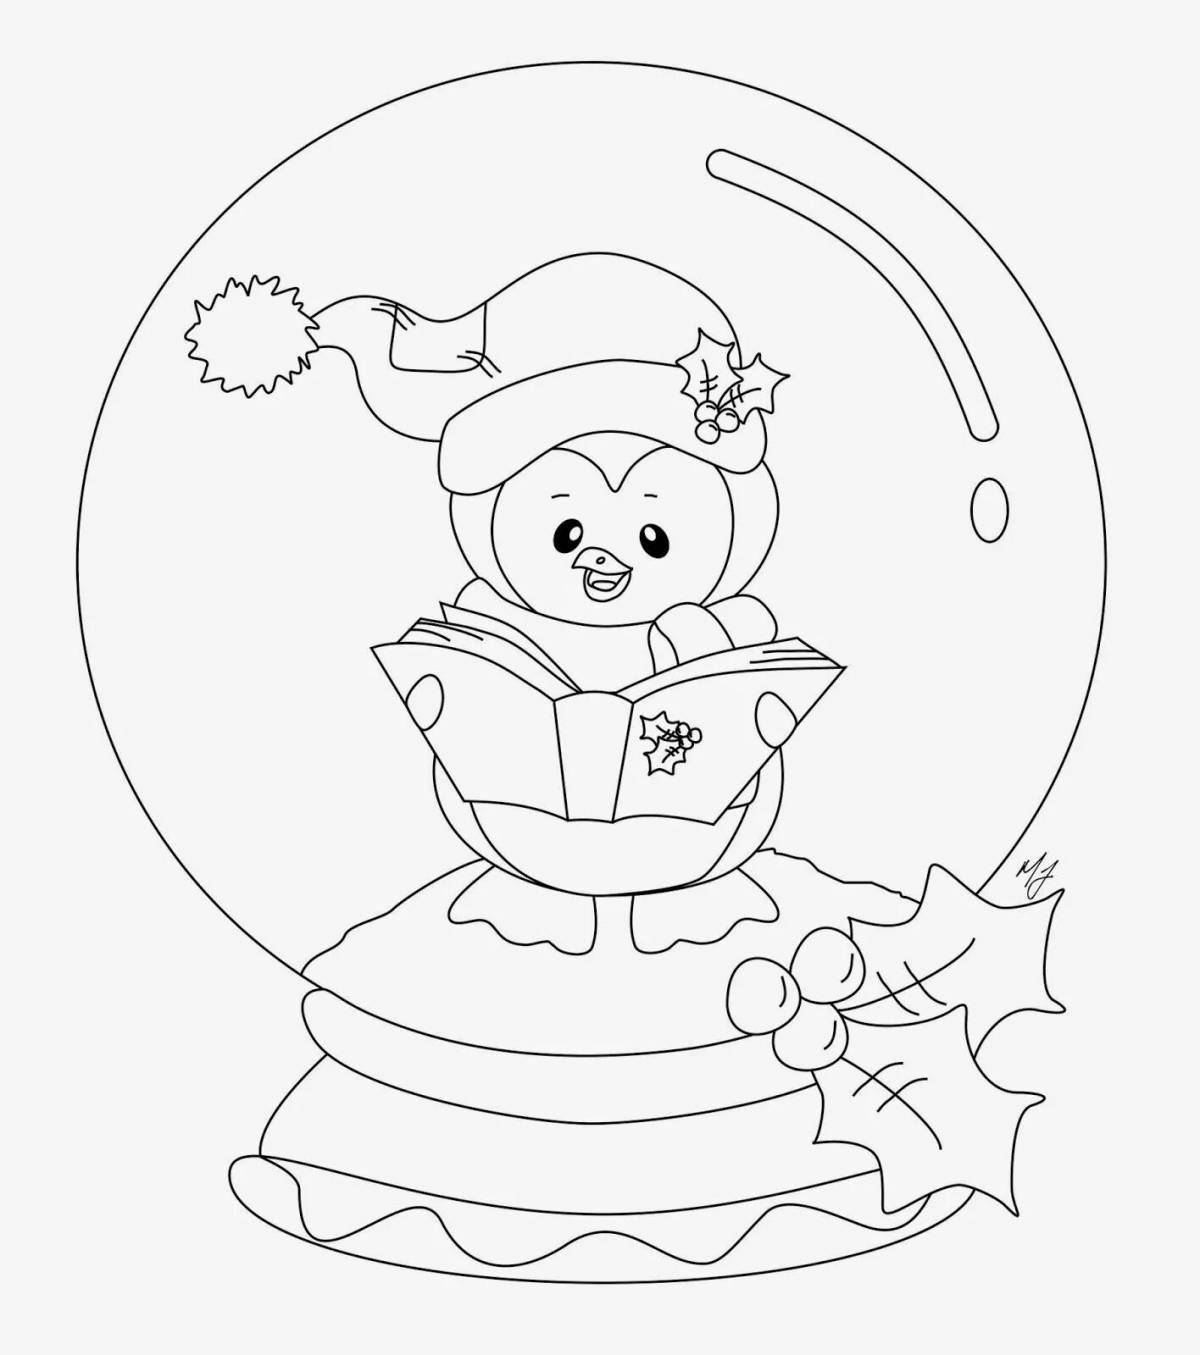 Exciting snowball coloring page